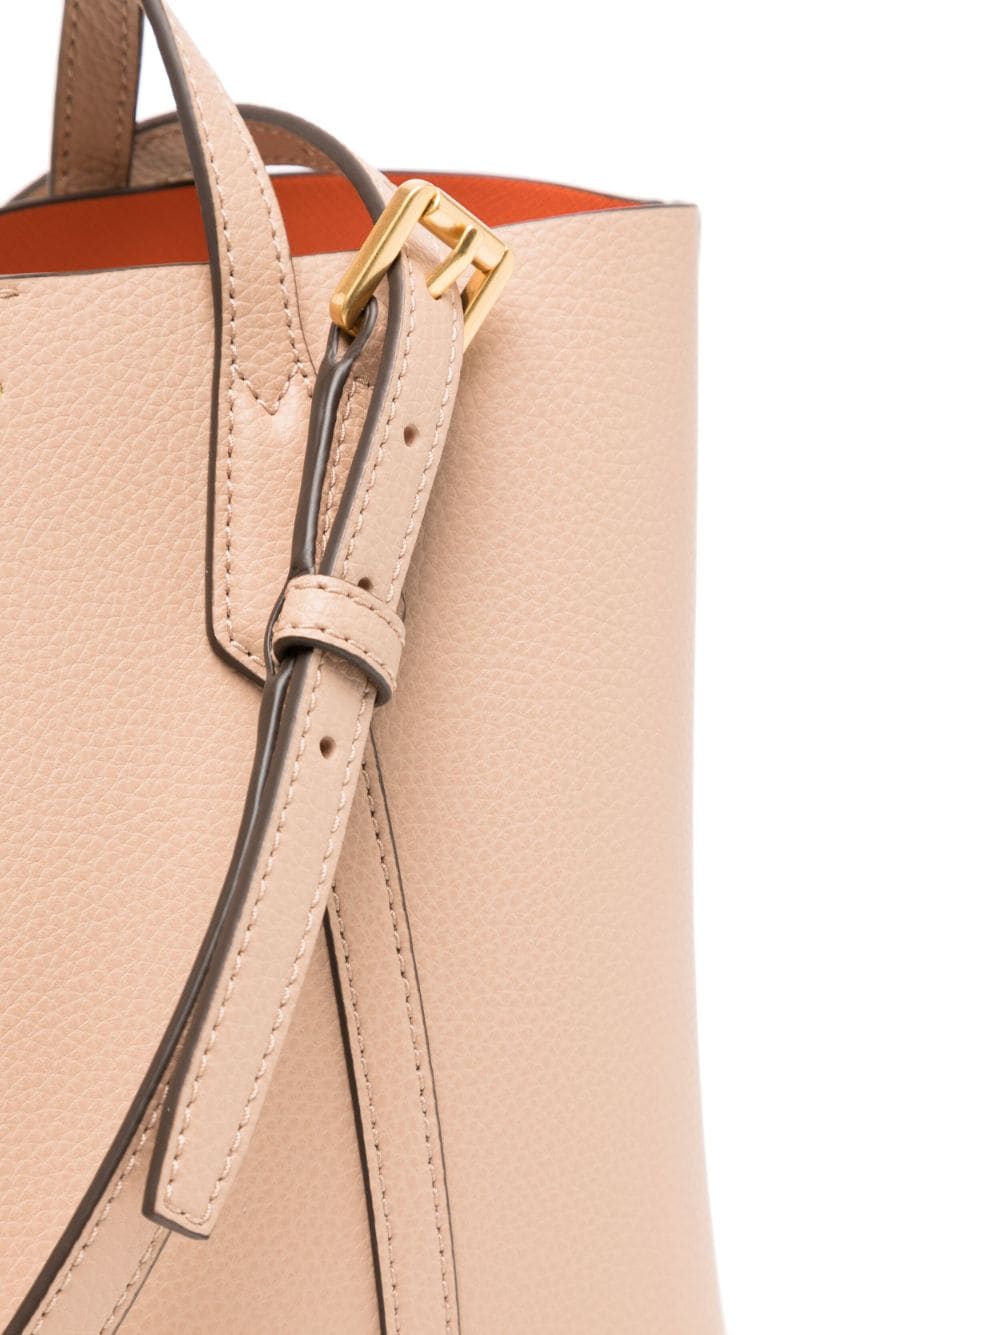 Tory Burch Small Perry Tote Bag - Farfetch